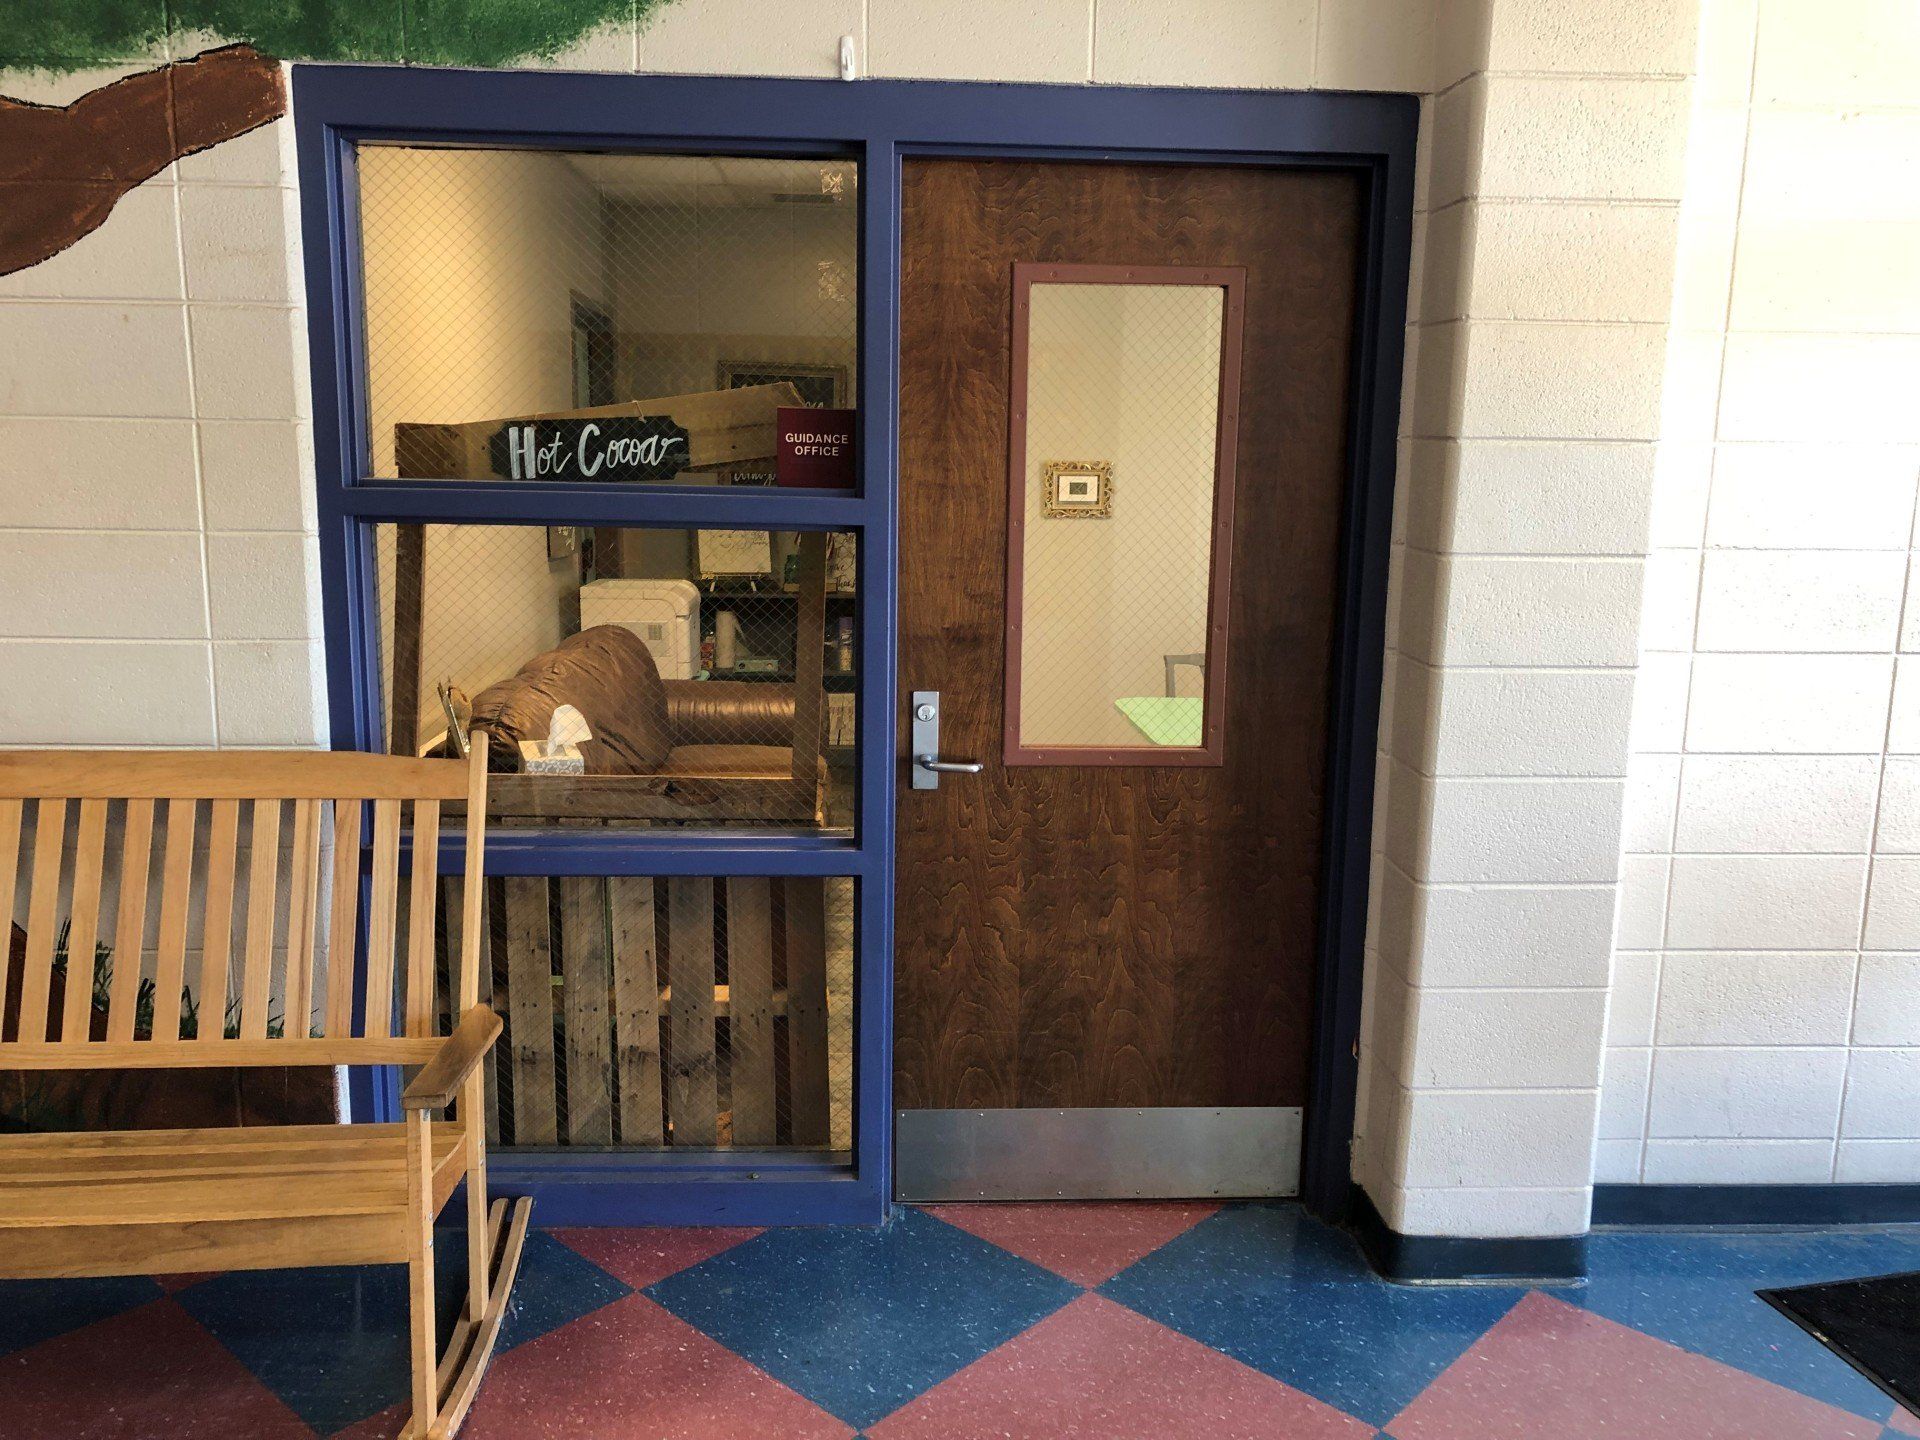 Professional business window tinting - Privacy was gained inside the office of this Elementary school in April 2019.